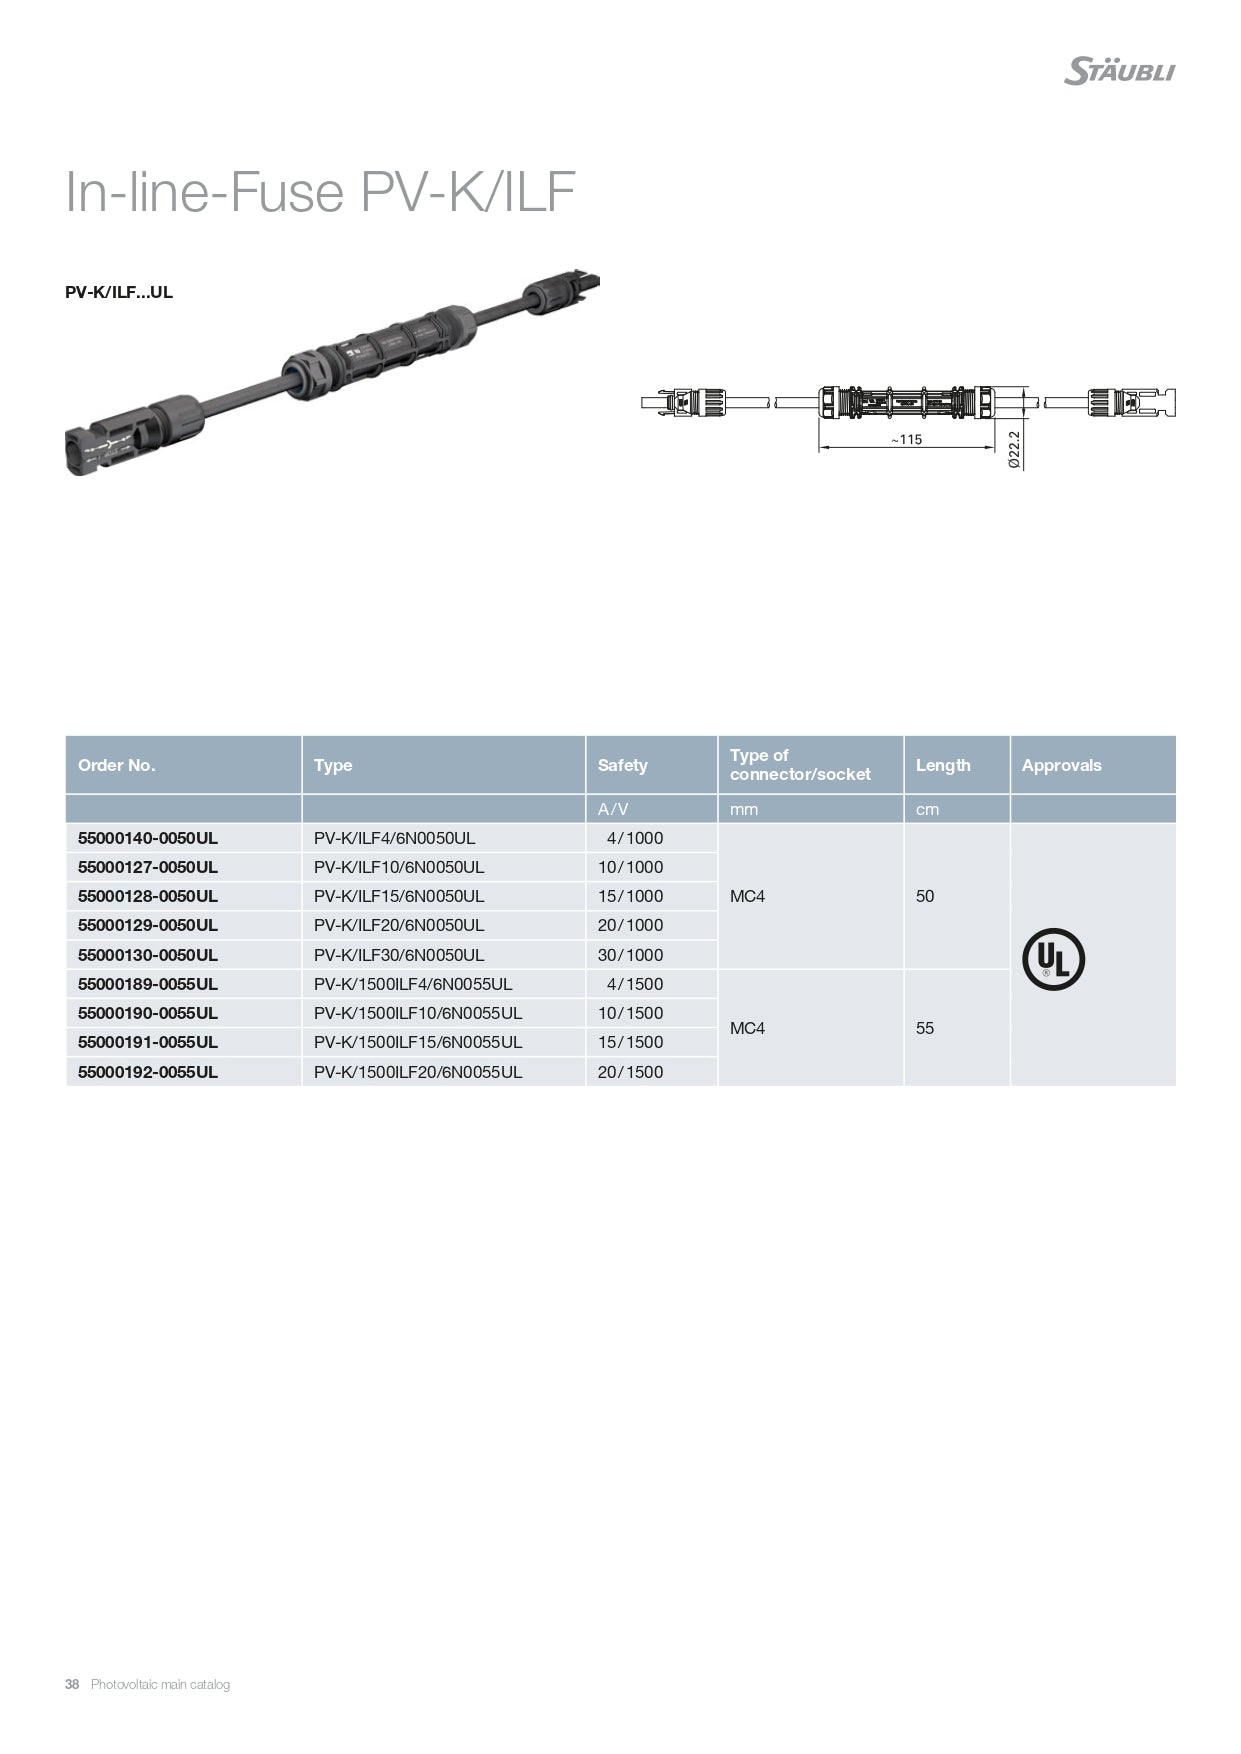 Multi Contact | 1500V in-line fuse 4/10/15/20A｜2-4 Weeks Ship Time